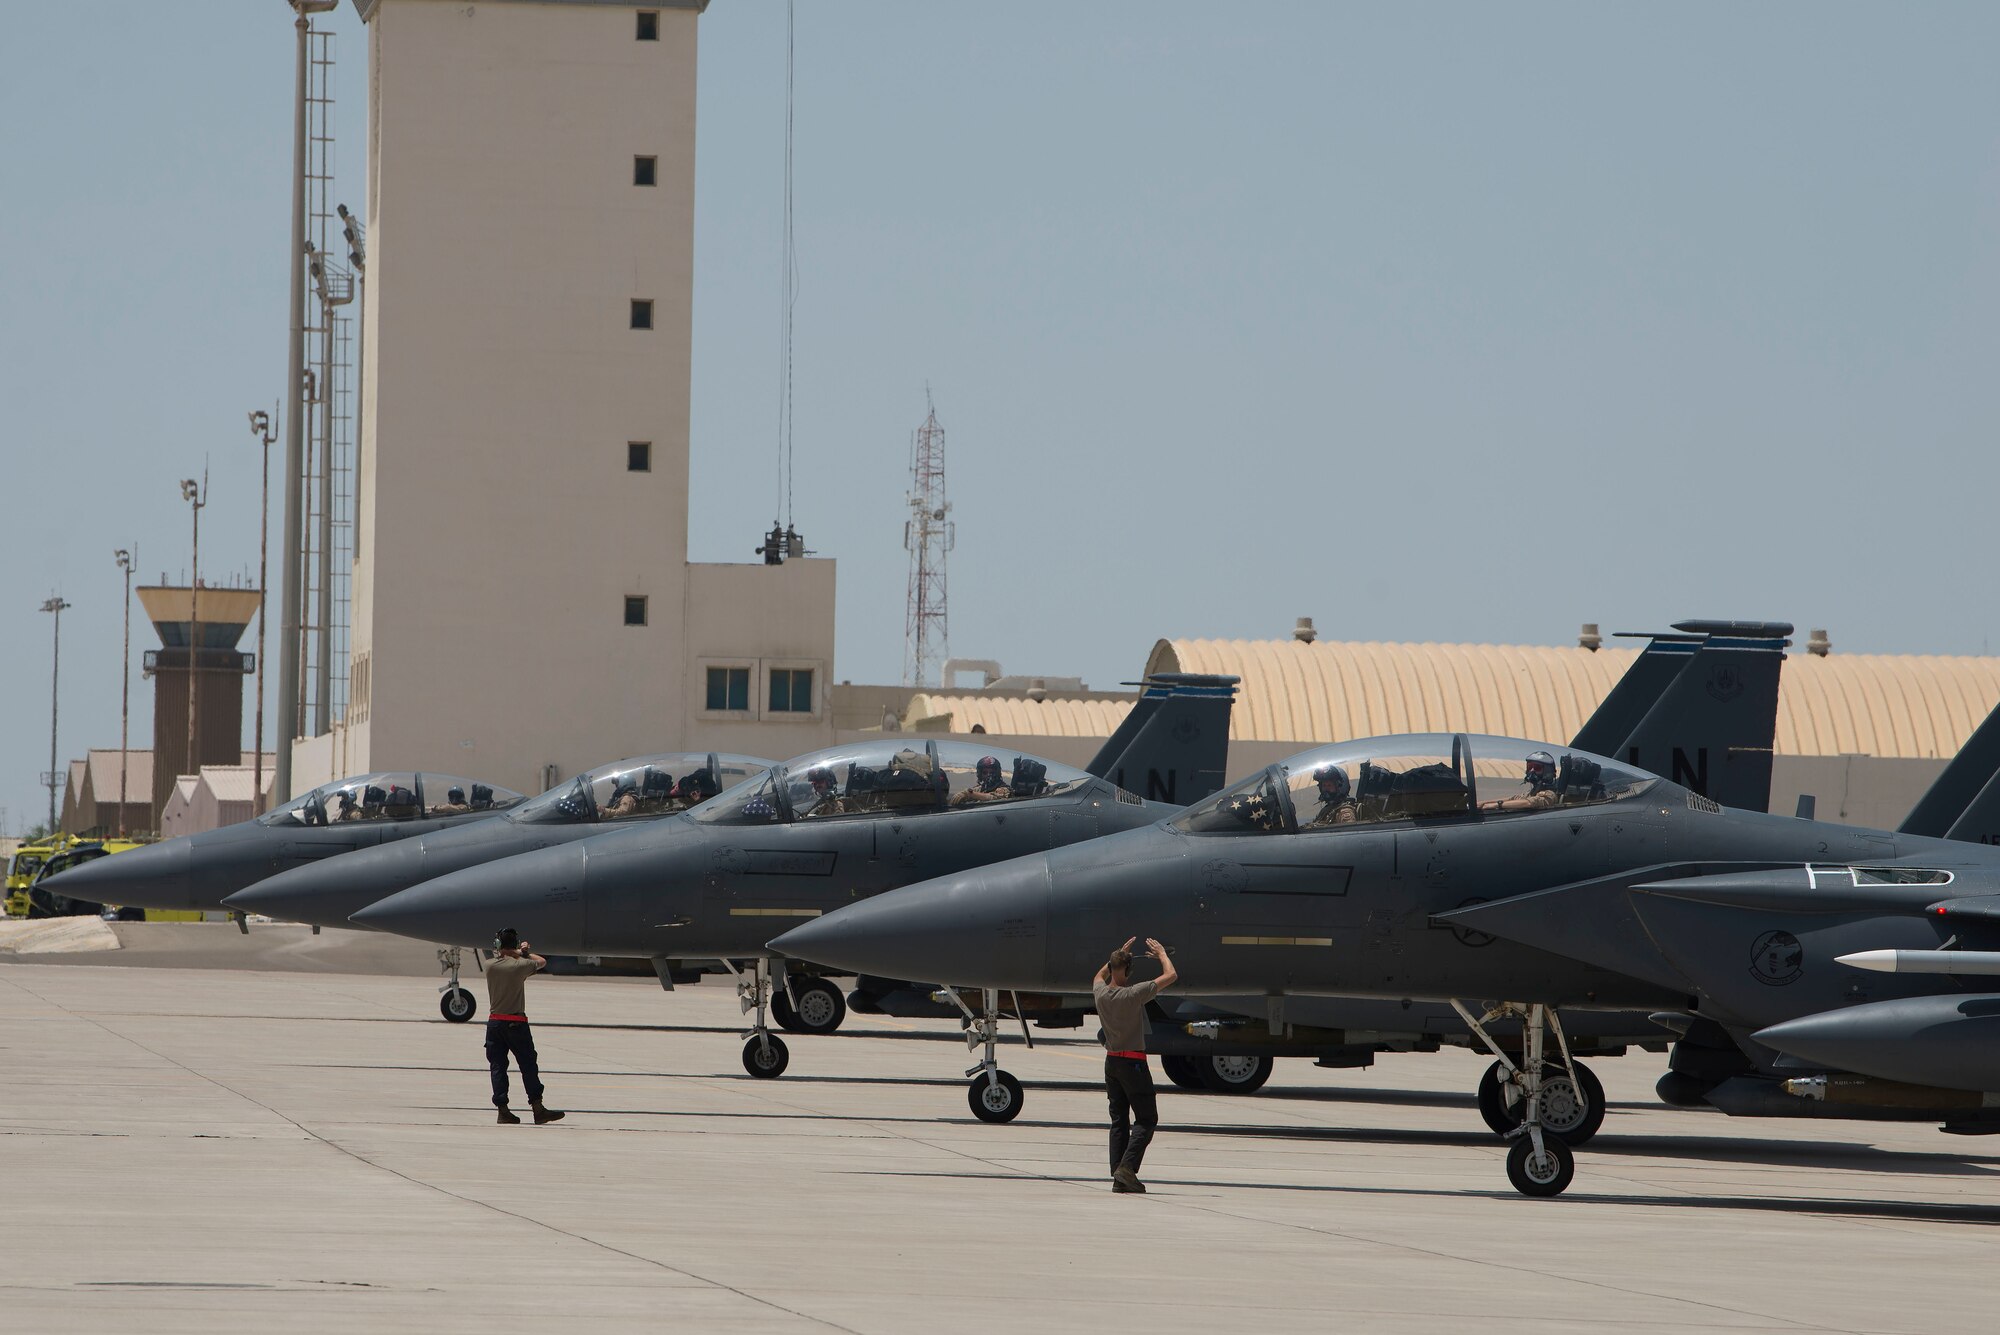 Four F-15E Strike Eagles assigned to the 494th Expeditionary Fighter Squadron (EFS) line up on the flightline at Al Dhafra Air Base, United Arab Emirates, April 25, 2021.